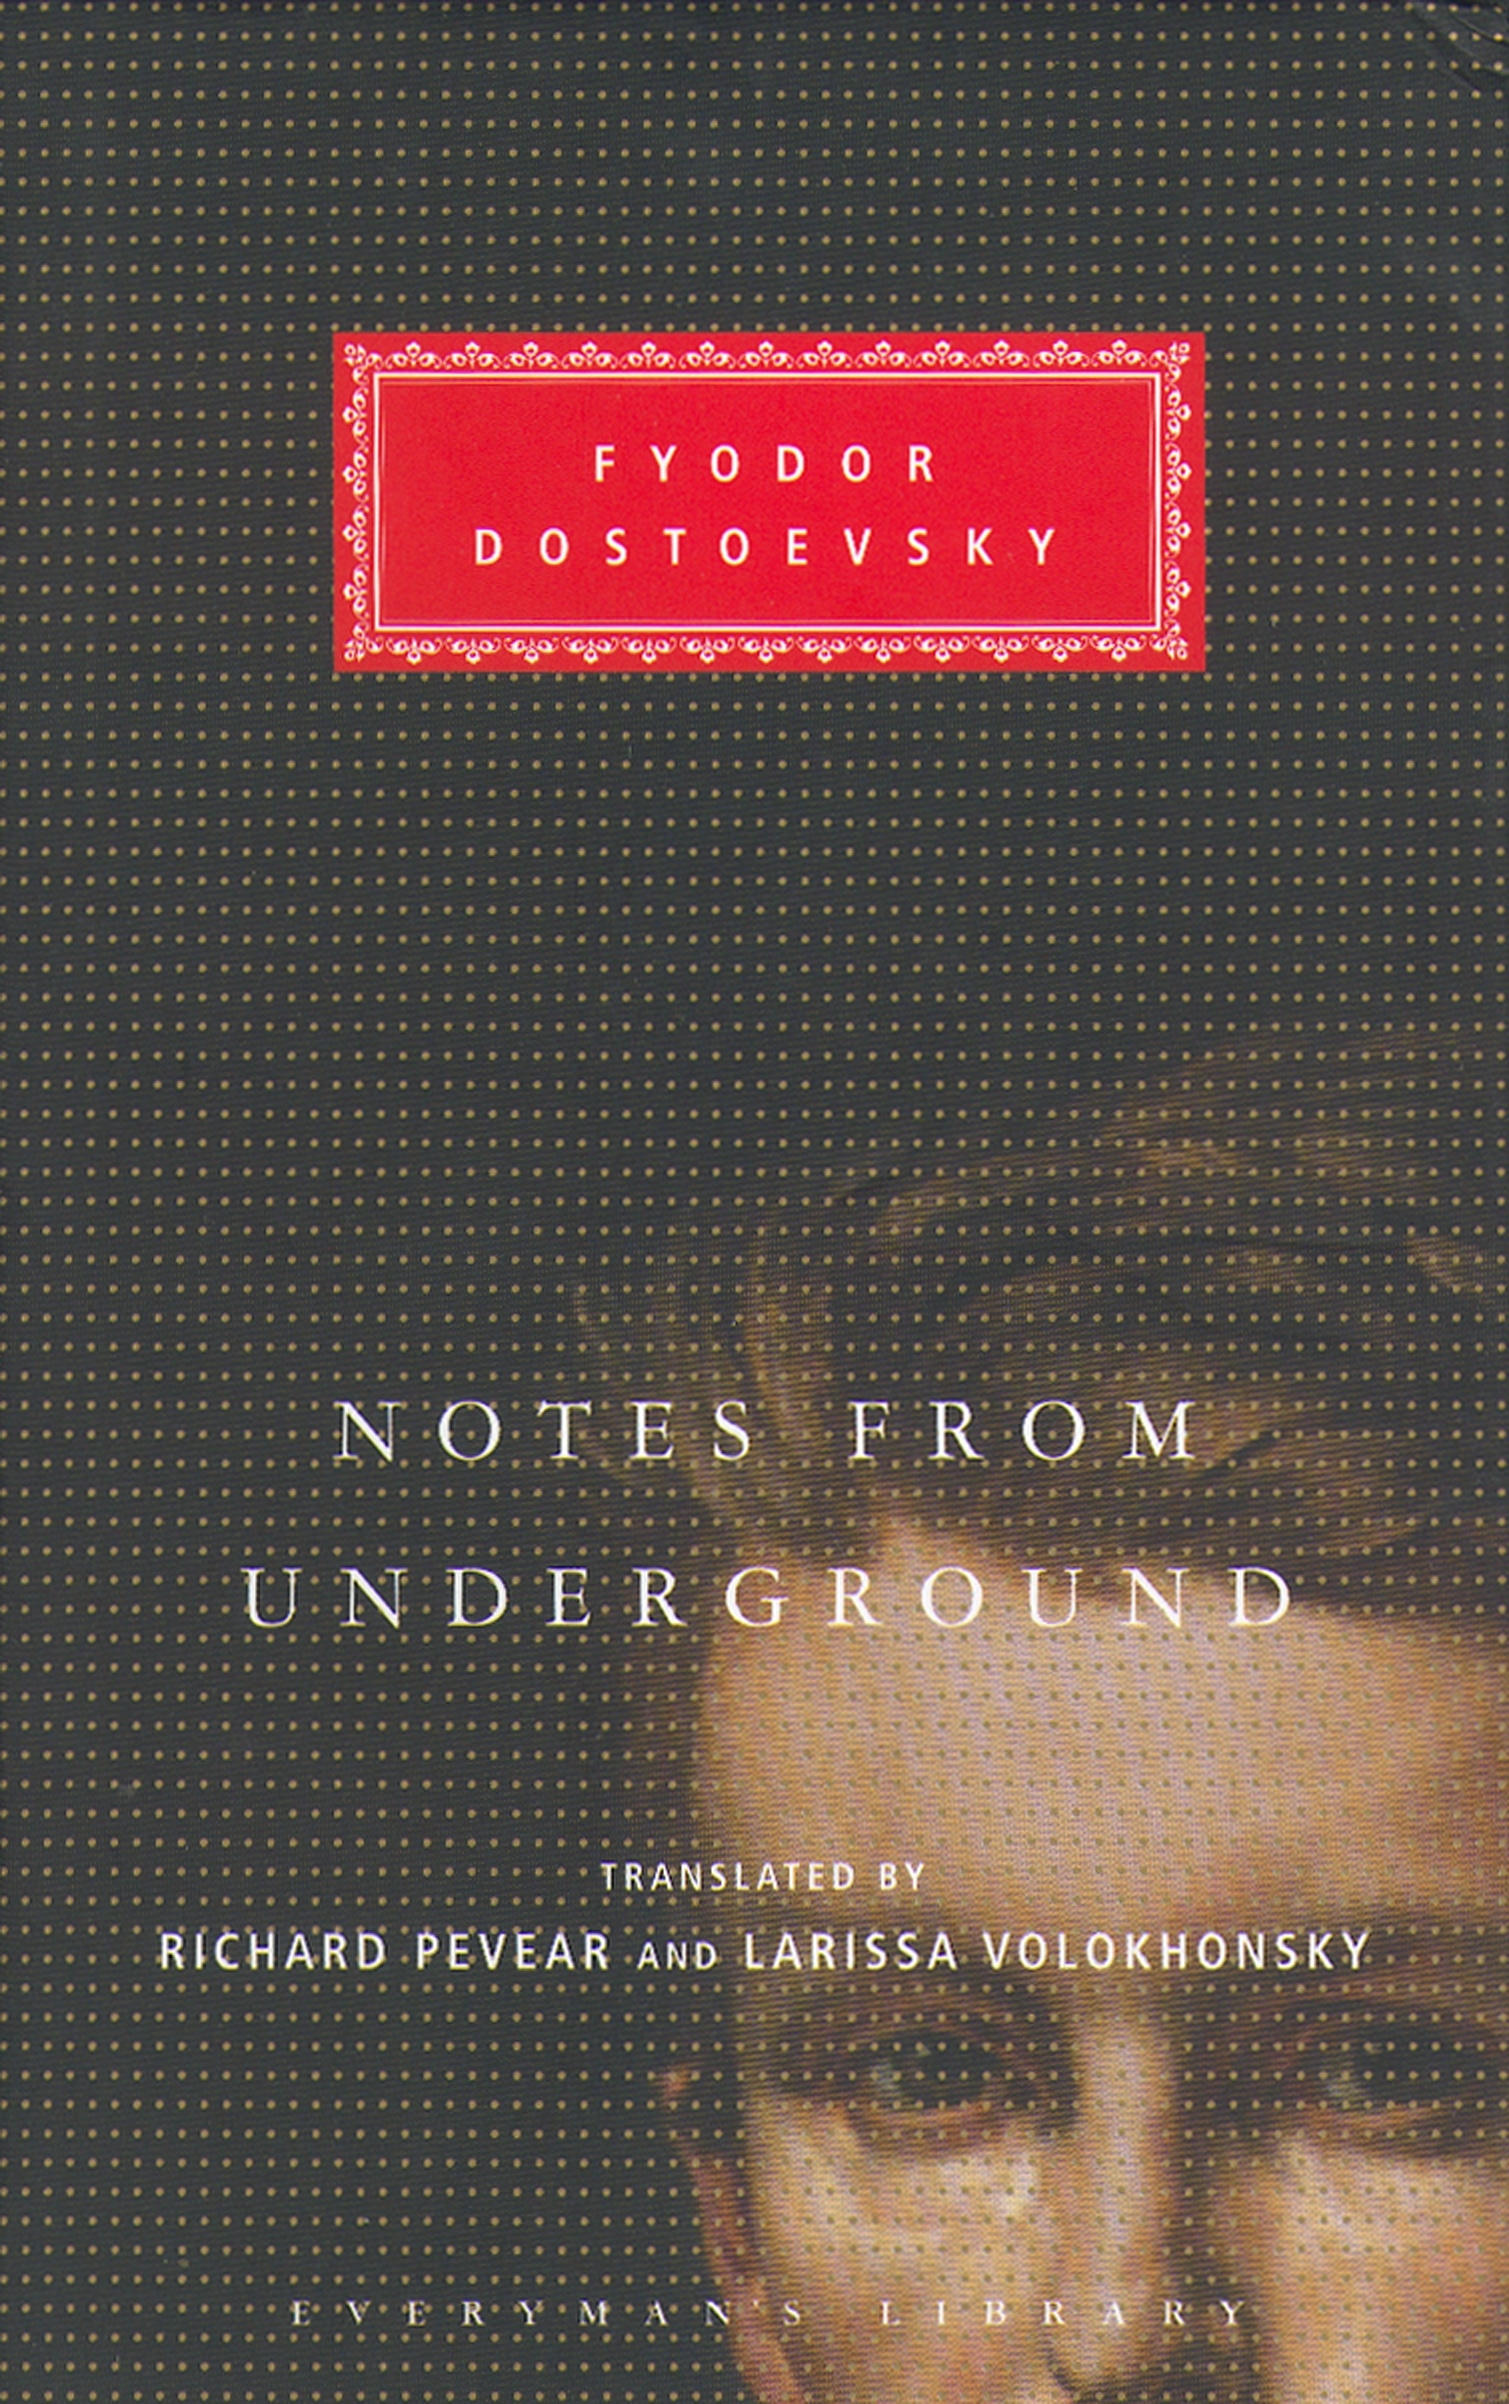 Book “Notes From The Underground” by Fyodor Dostoyevsky — March 4, 2004